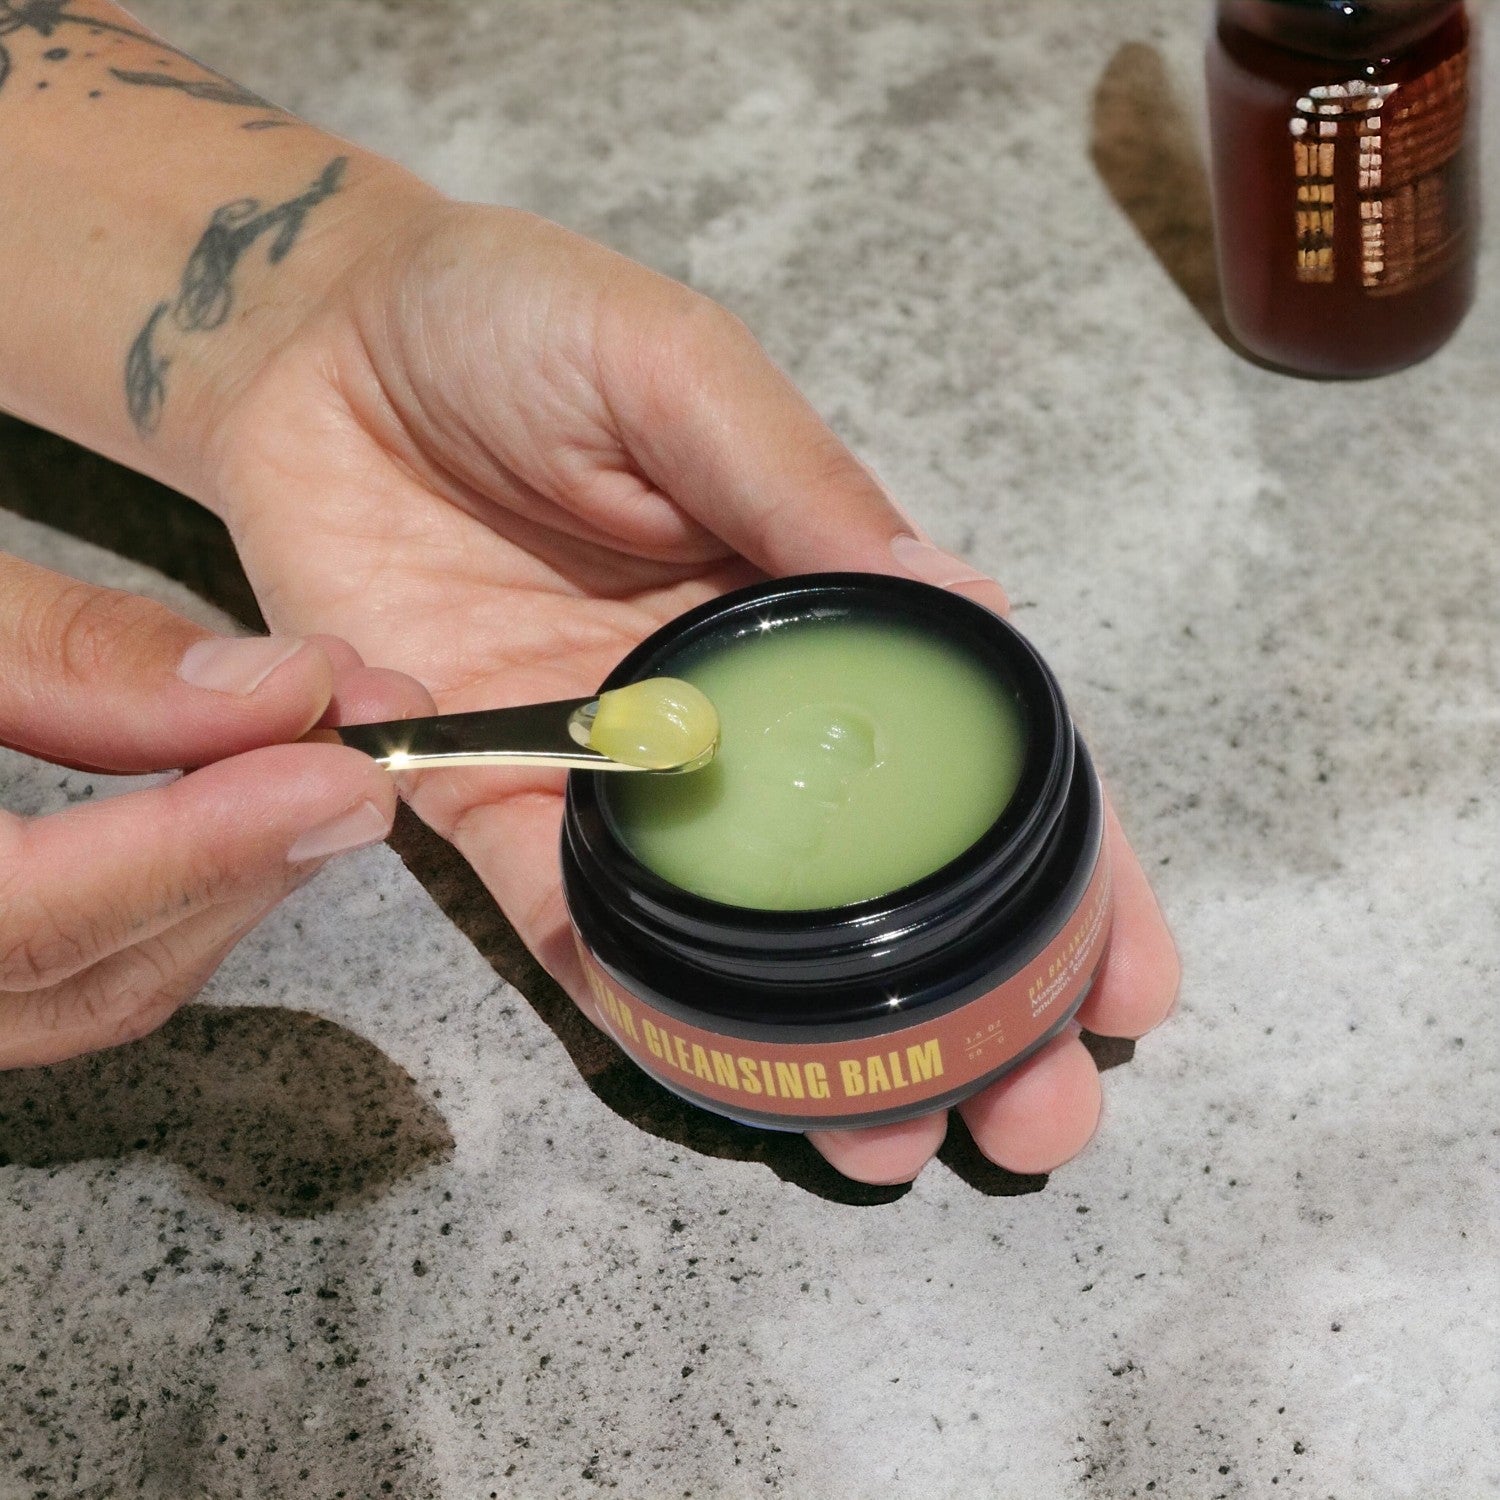 Hands holding a jar and teaspoon of the Goji Cleansing balm over a concrete countertop